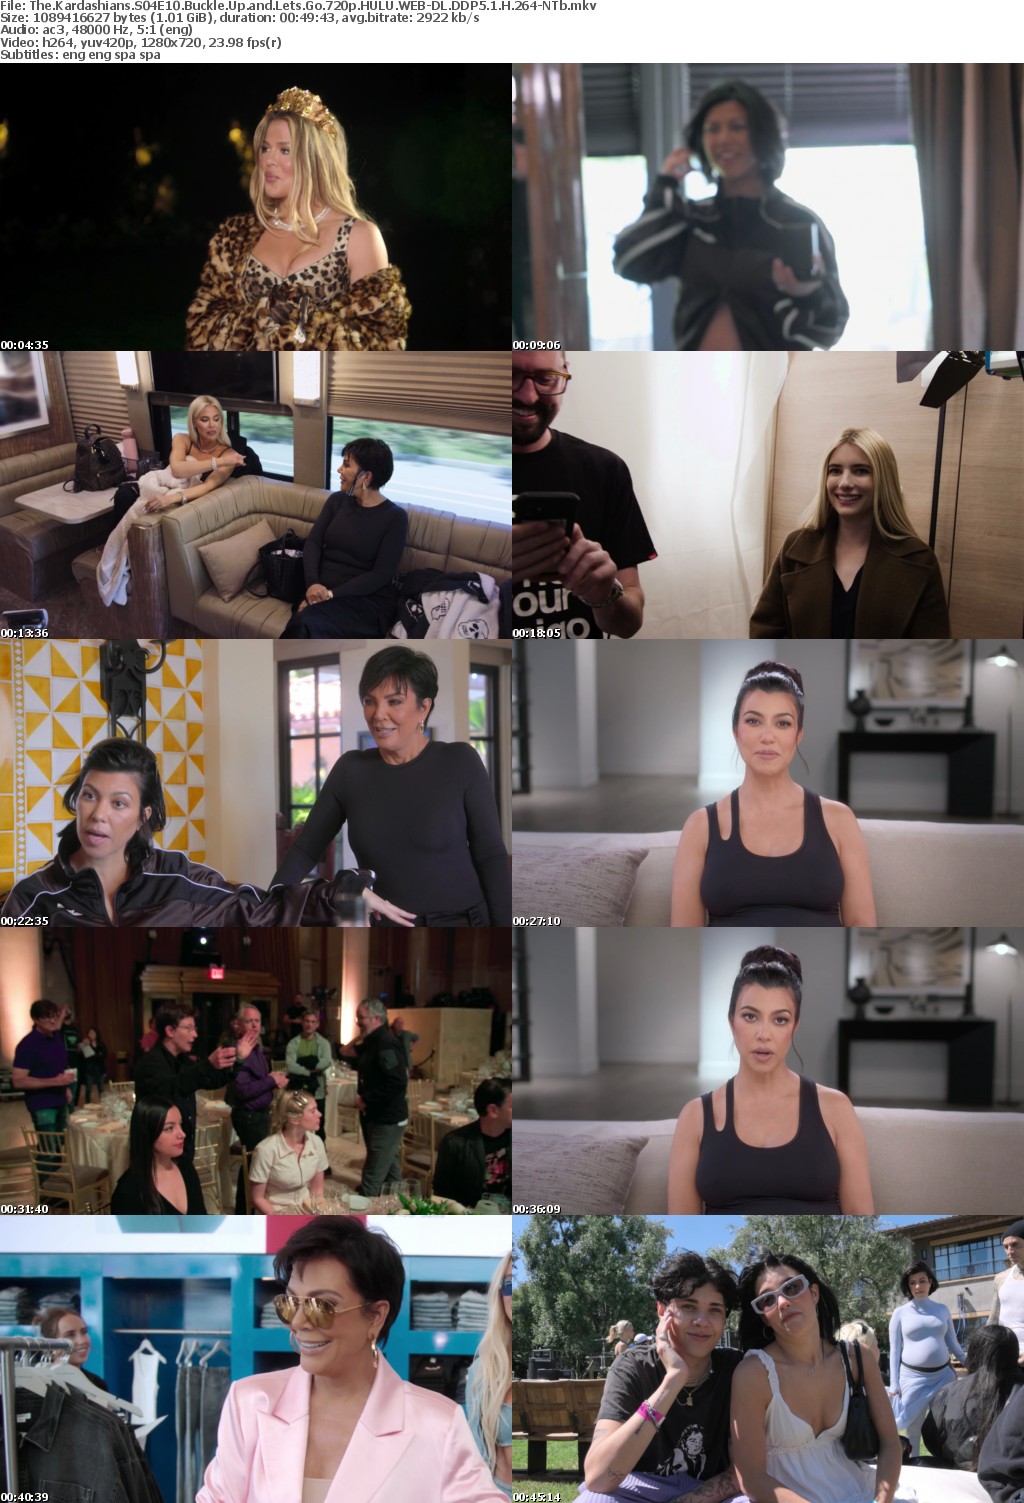 The Kardashians S04E10 Buckle Up and Lets Go 720p HULU WEB-DL DDP5 1 H 264-NTb